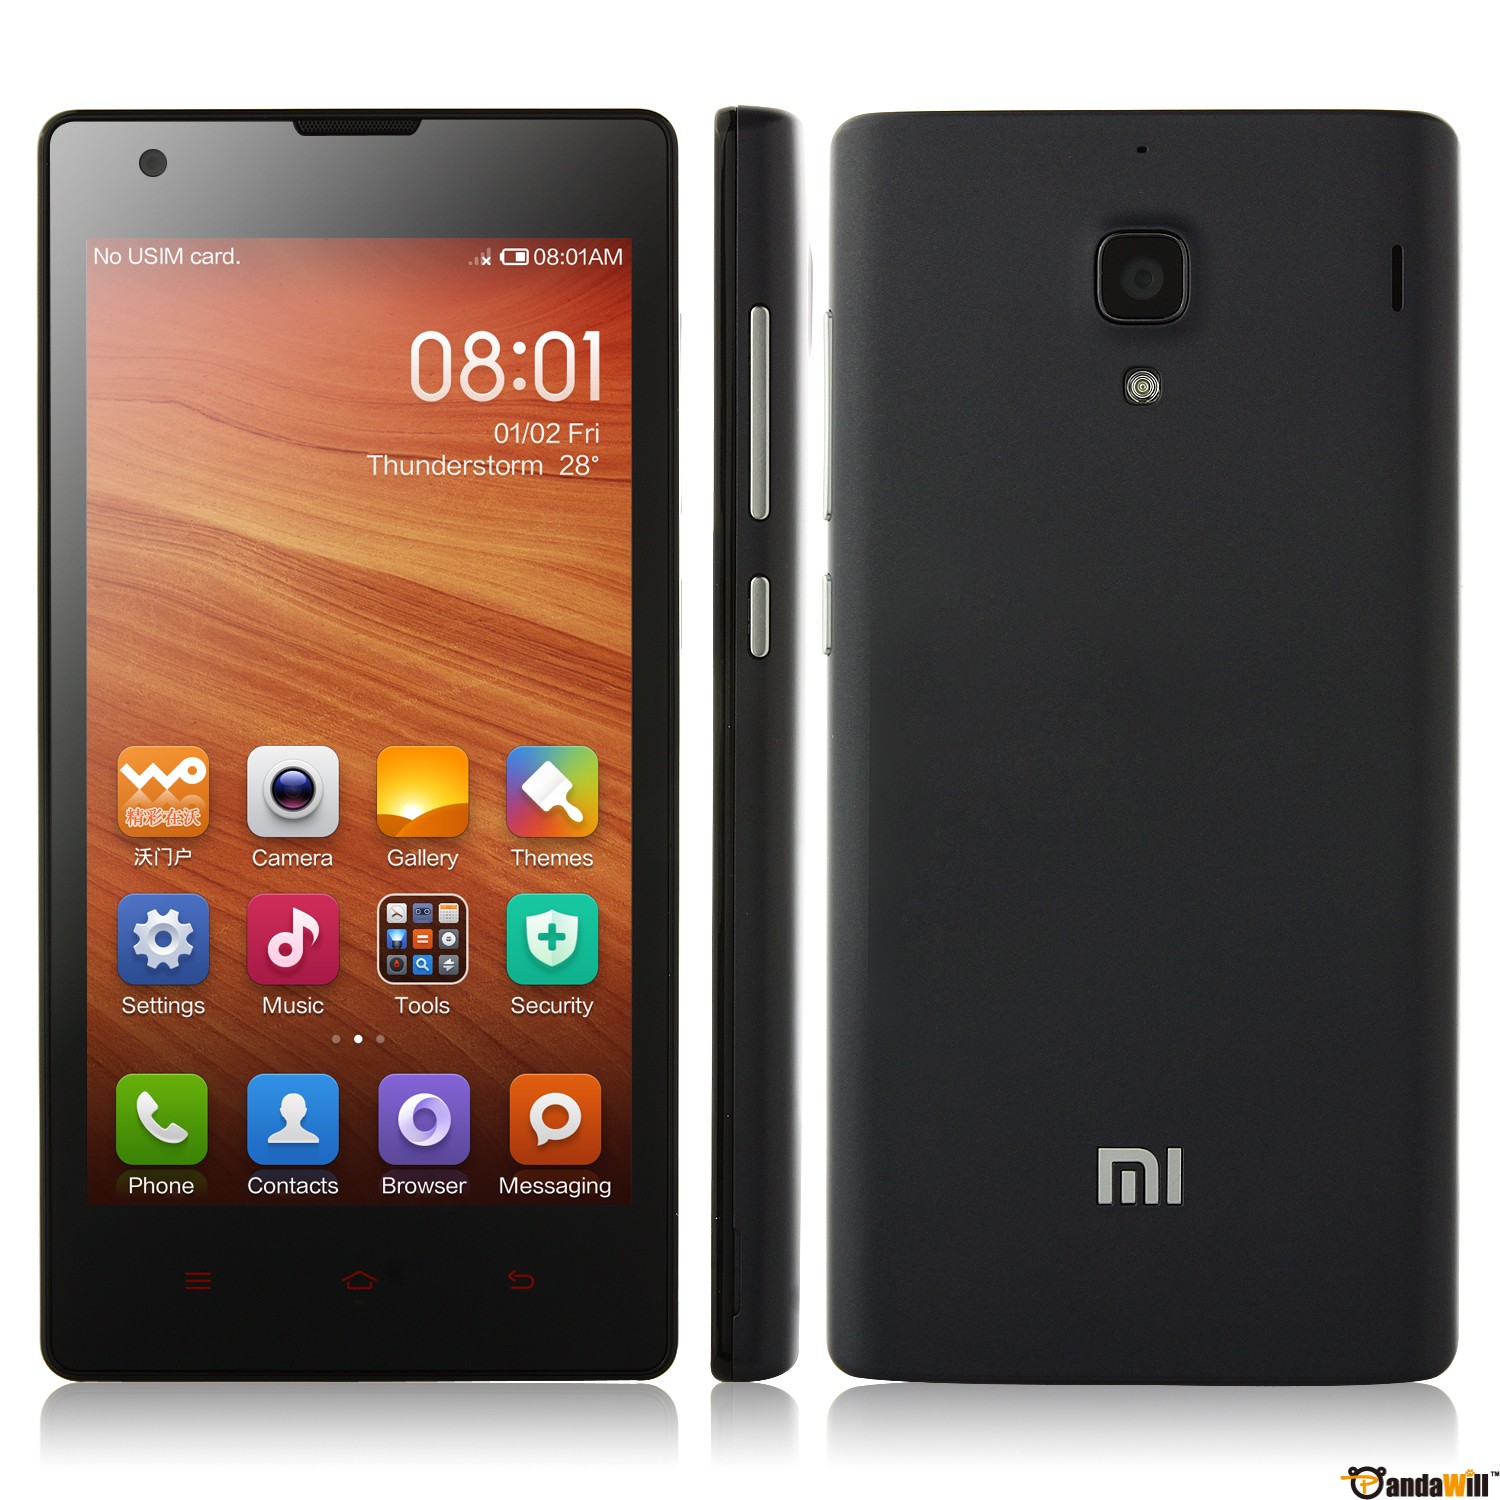 How to update Xiaomi Redmi 1S to CM13 Android 6.0 ...